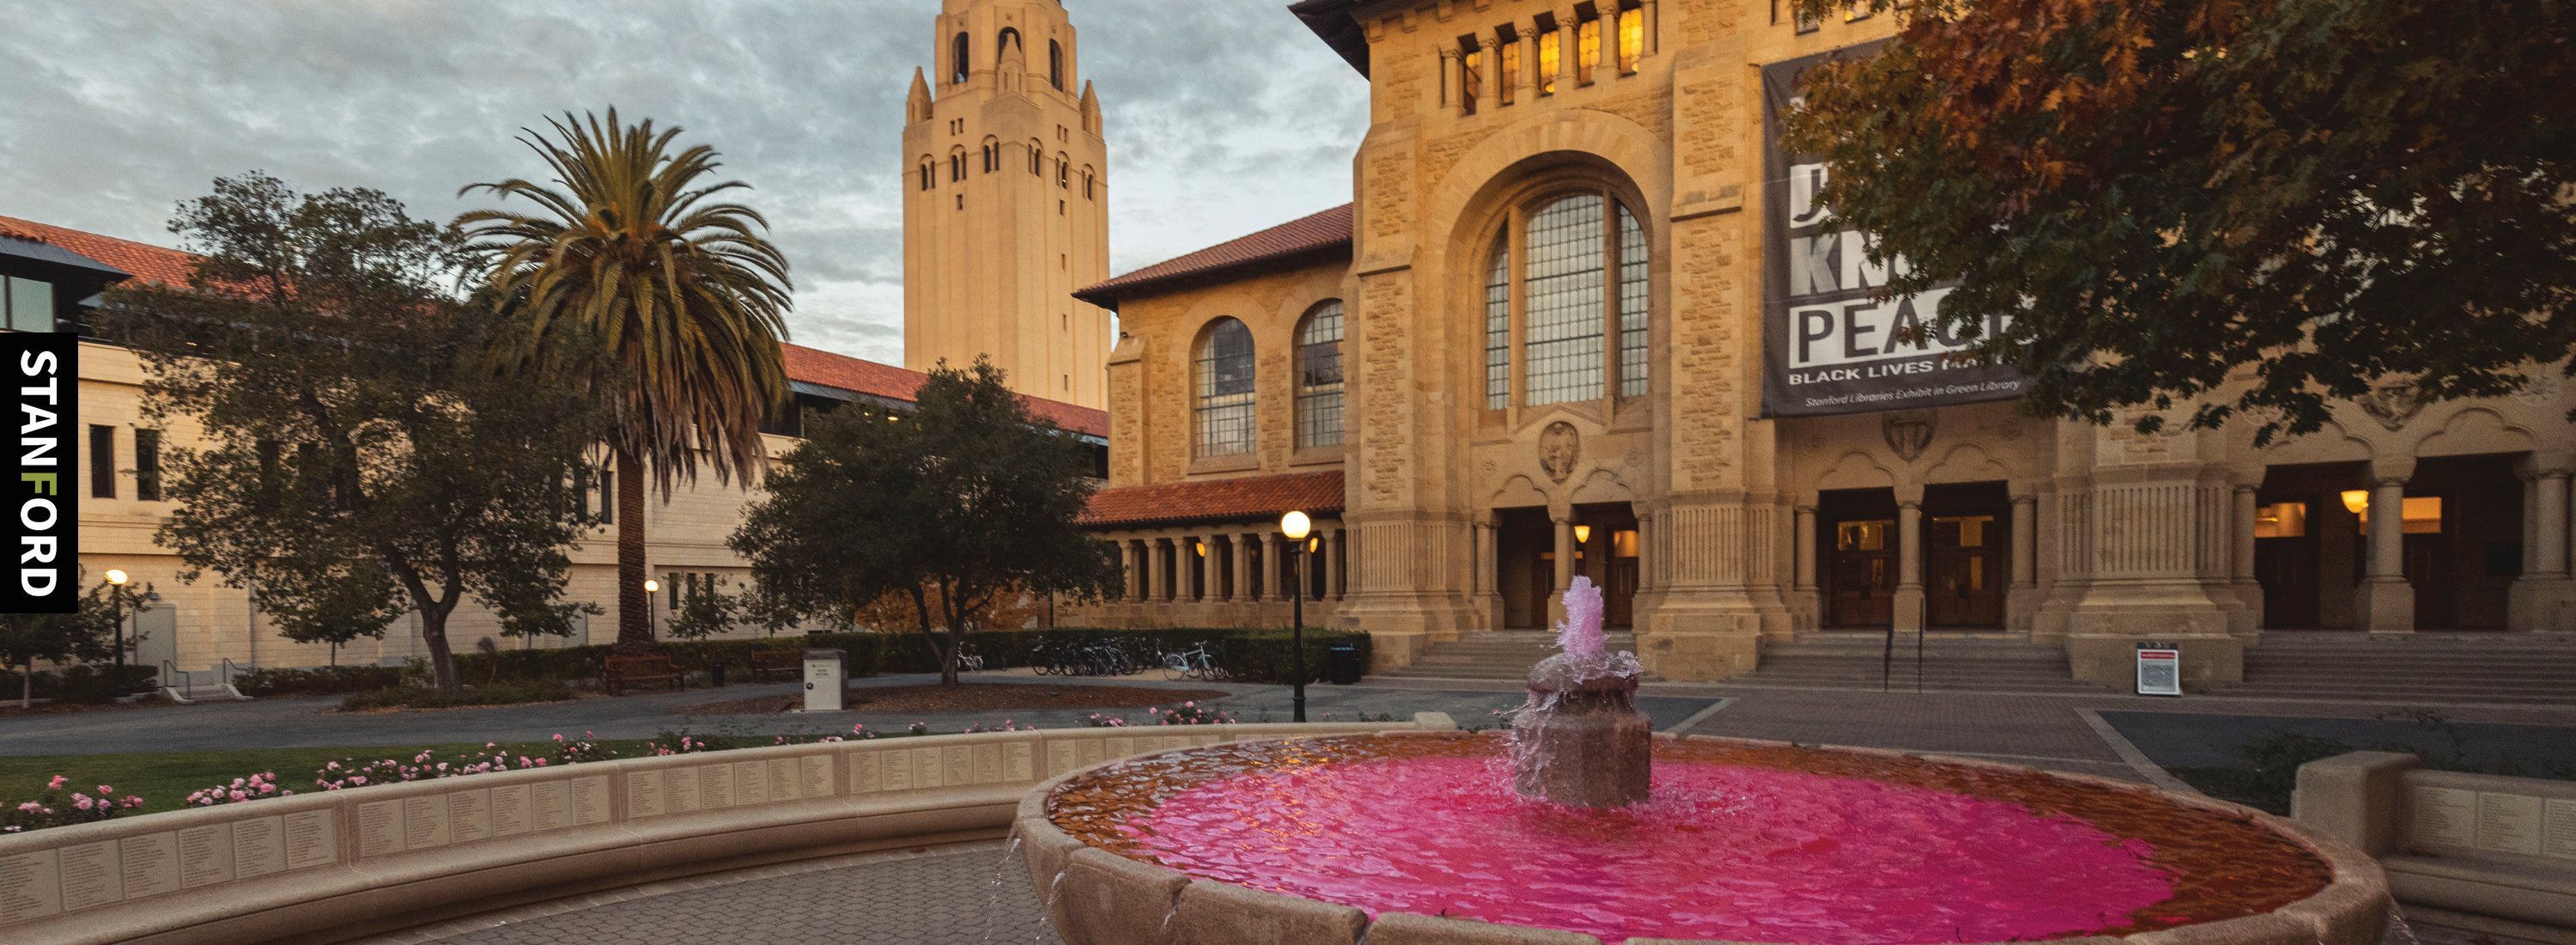 A fountain in front of a building with a clock tower - Stanford